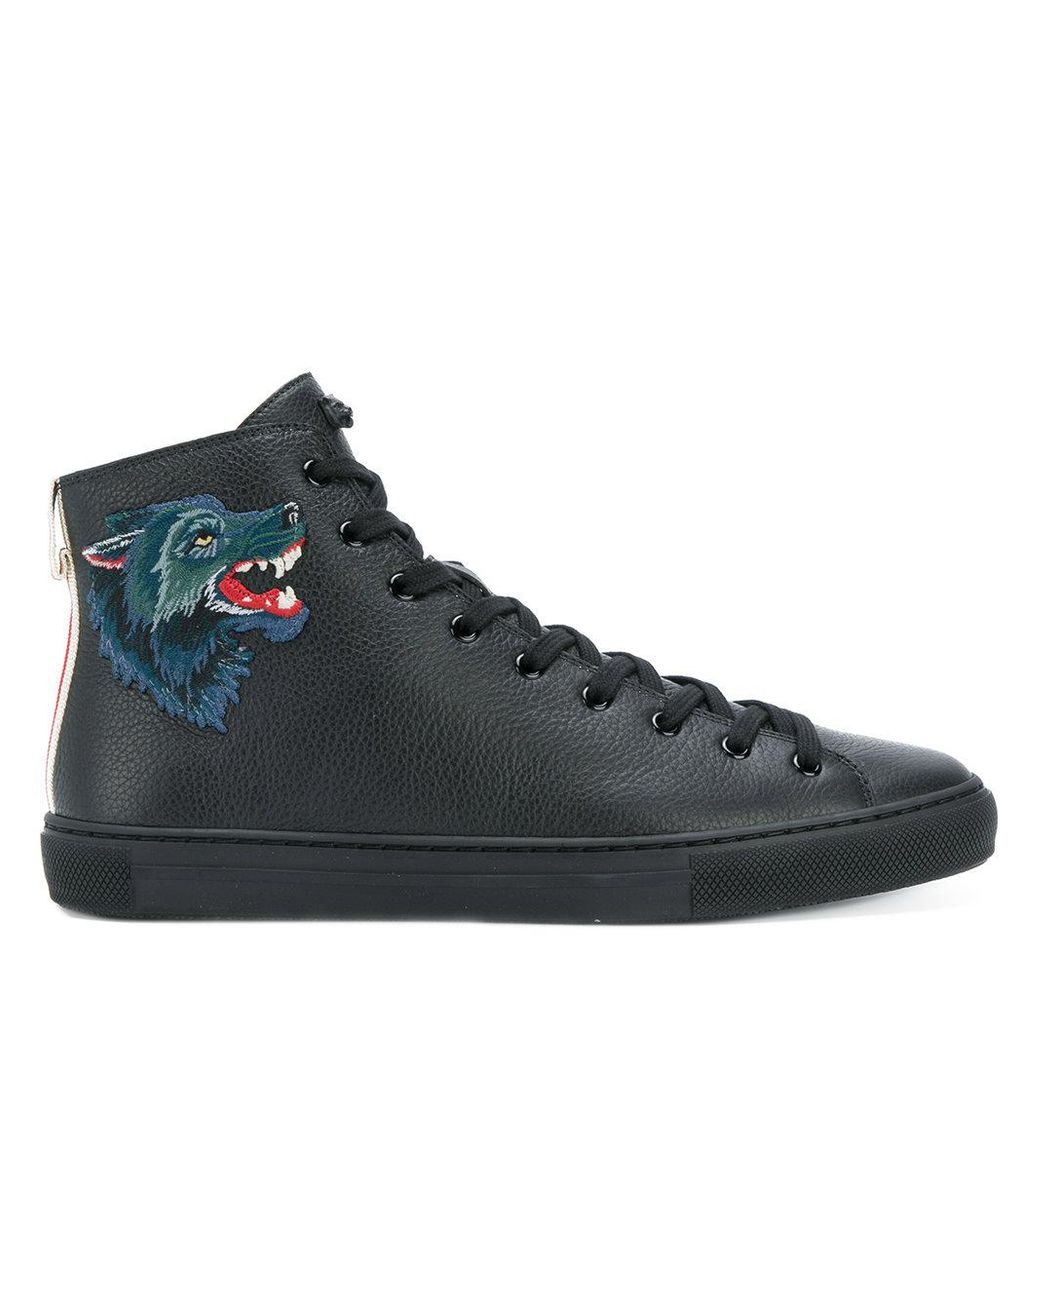 Gucci Ace Wolf Men's Designer Shoes Black Embroidered Leather